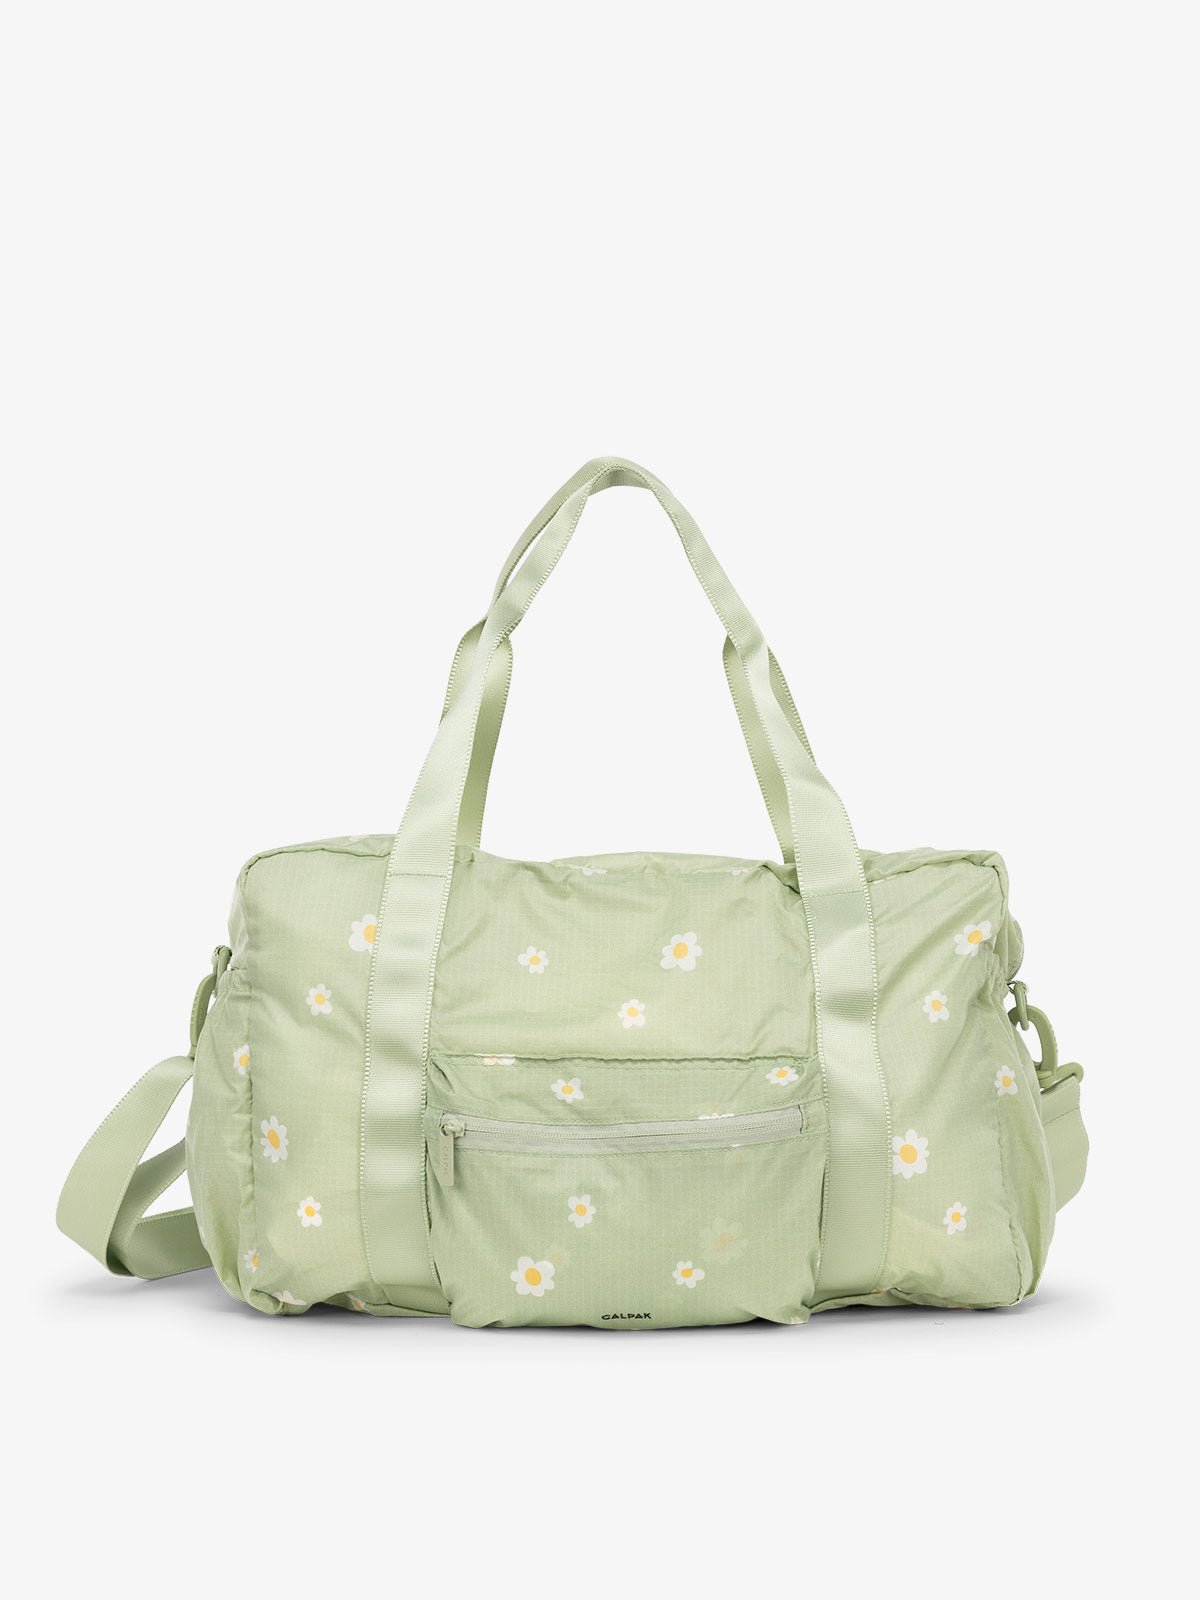 CALPAK Compakt duffel bag with removable crossbody strap and water resistant fabric in light green floral print